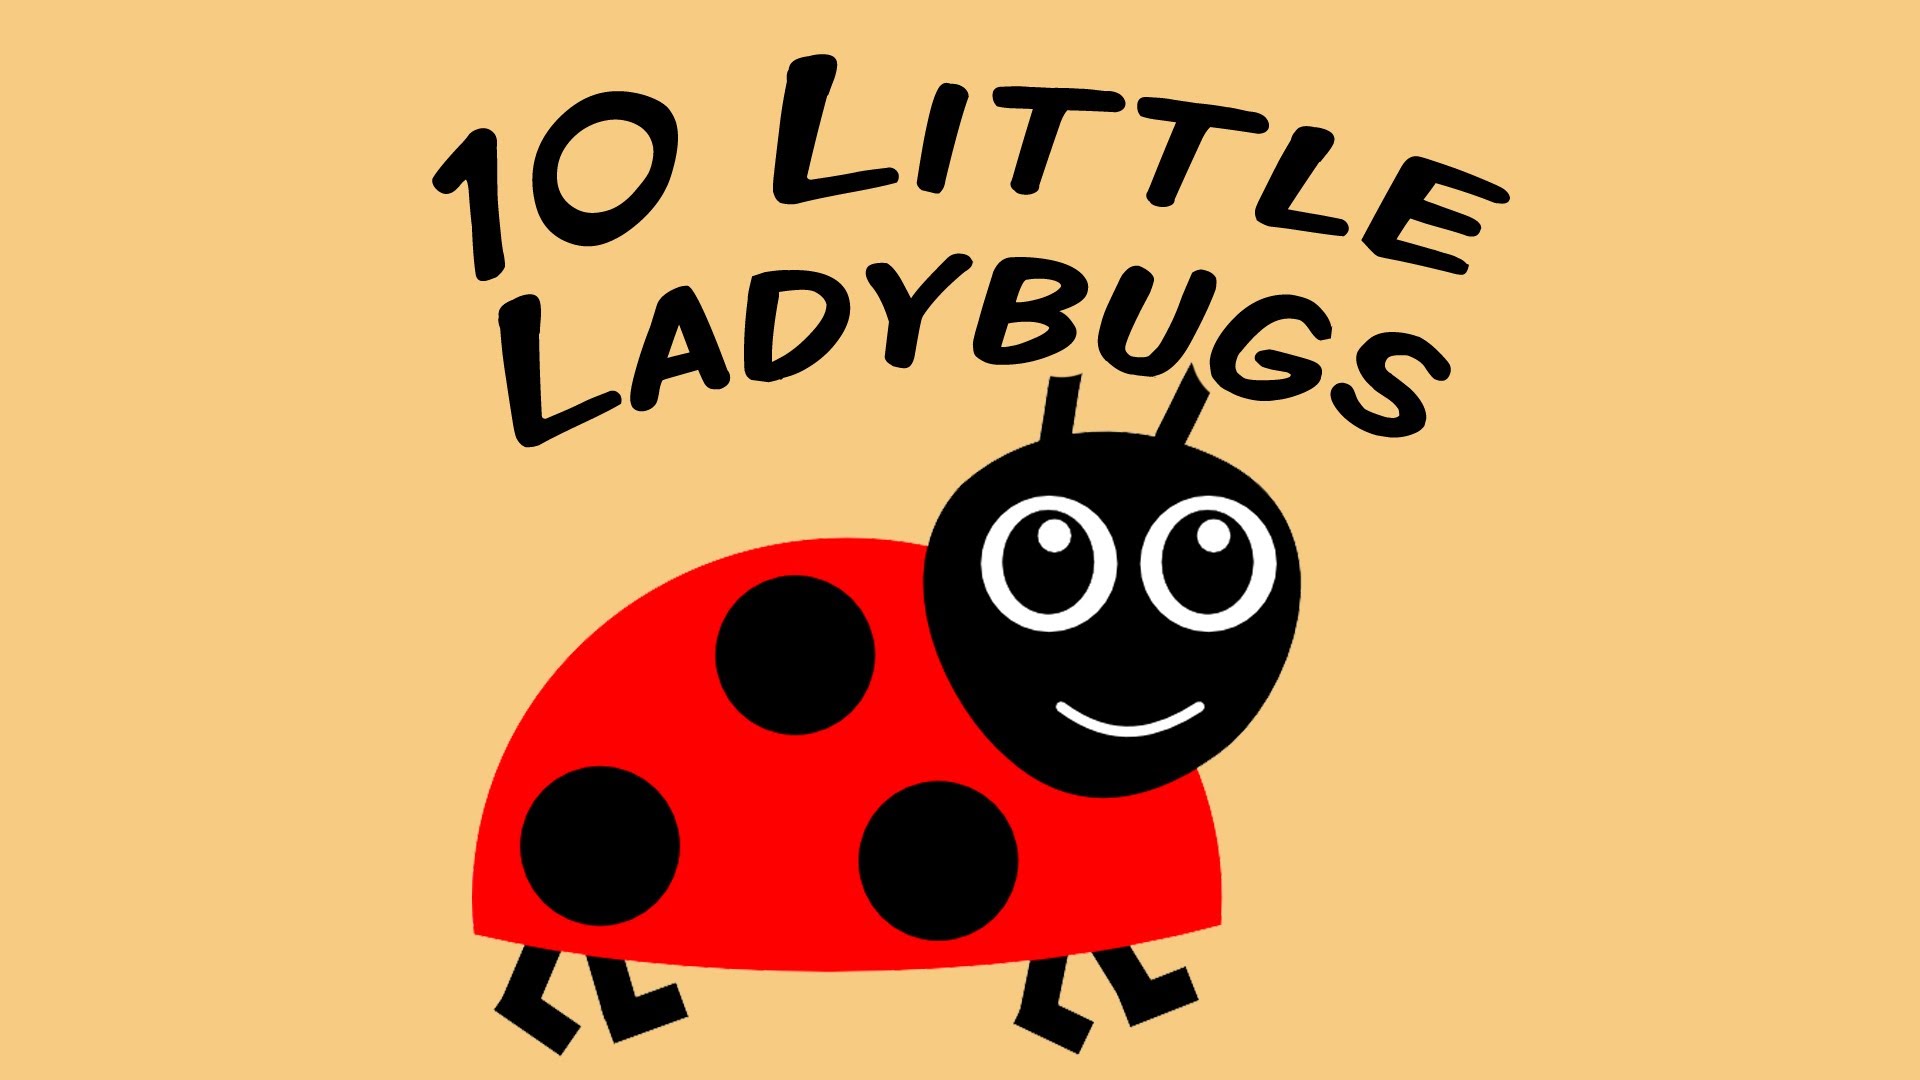 10 Little Ladybugs | counting song for children - YouTube